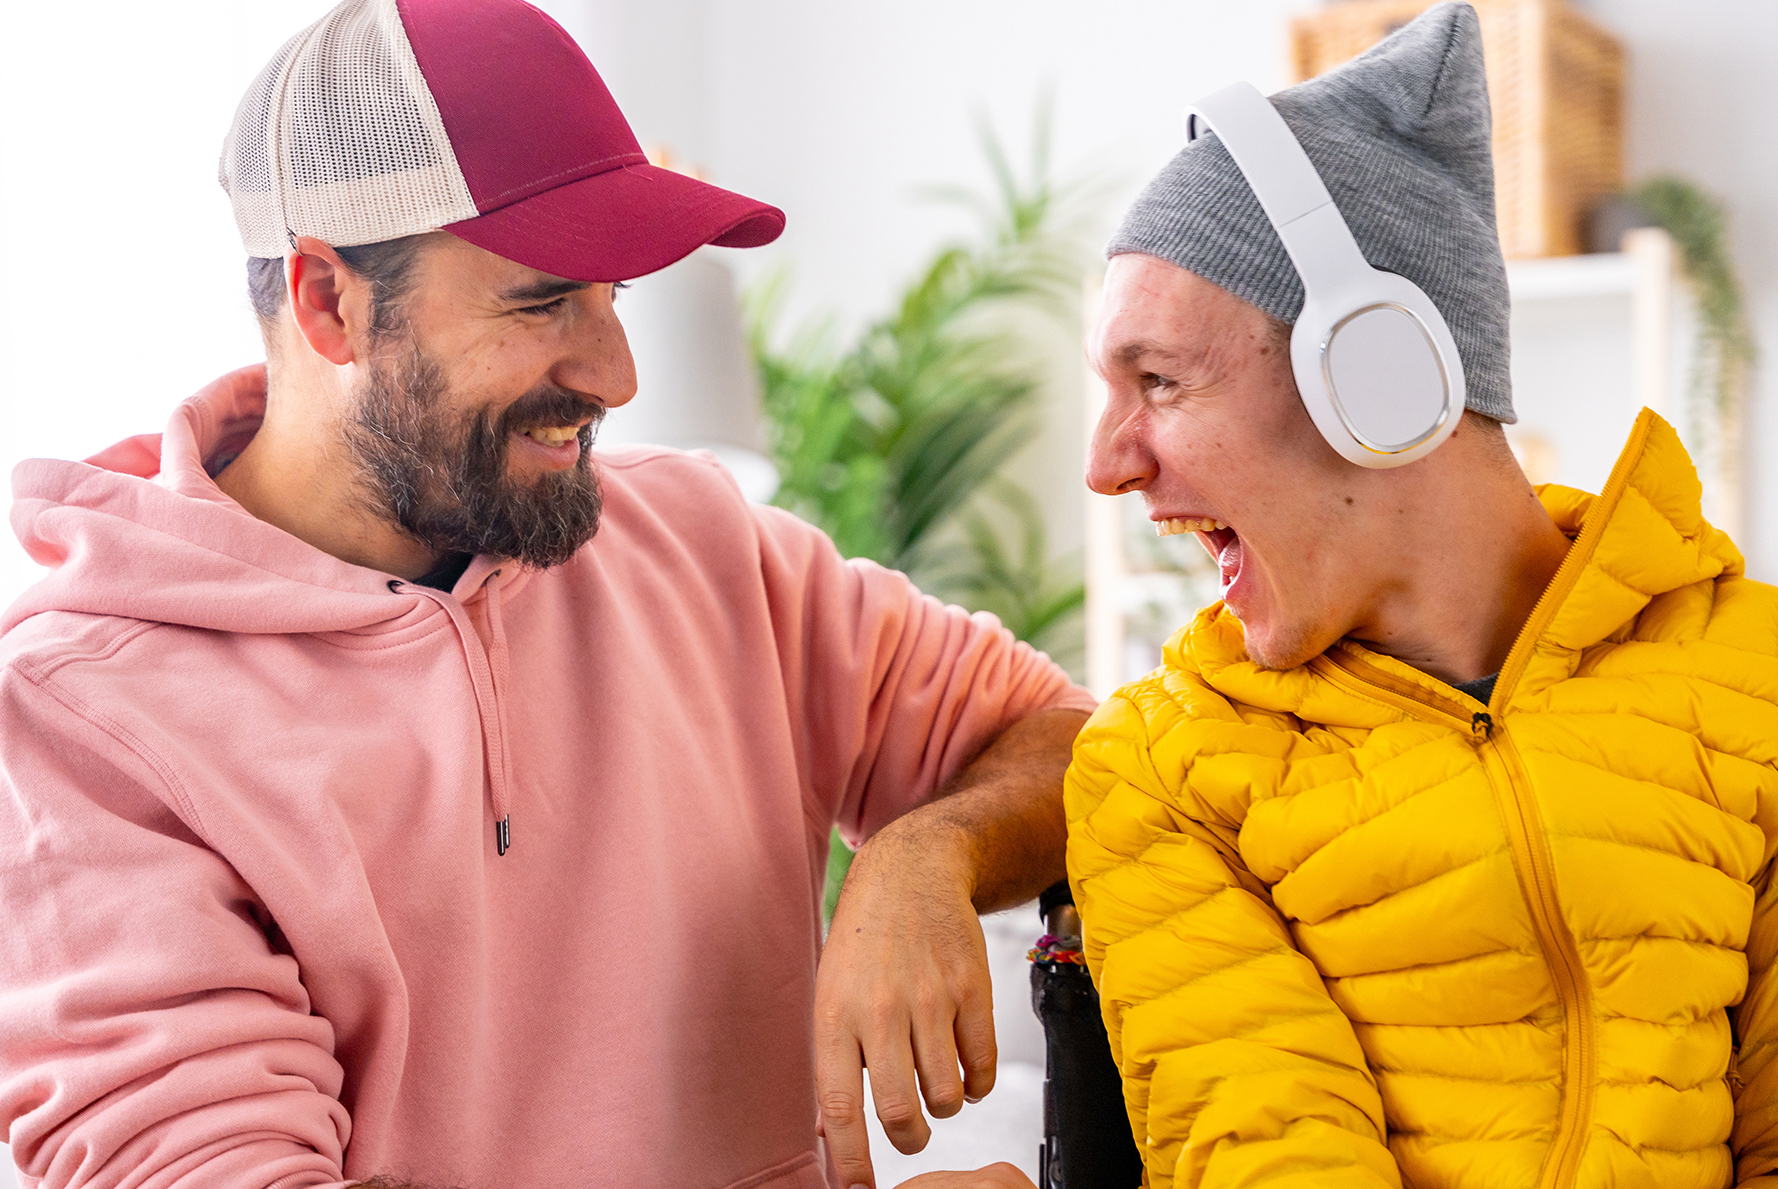 "A man wearing a ball cap and a pink hoodie smiles as he communicates with his friend who has ALS and is wearing a yellow jacket and headphones"